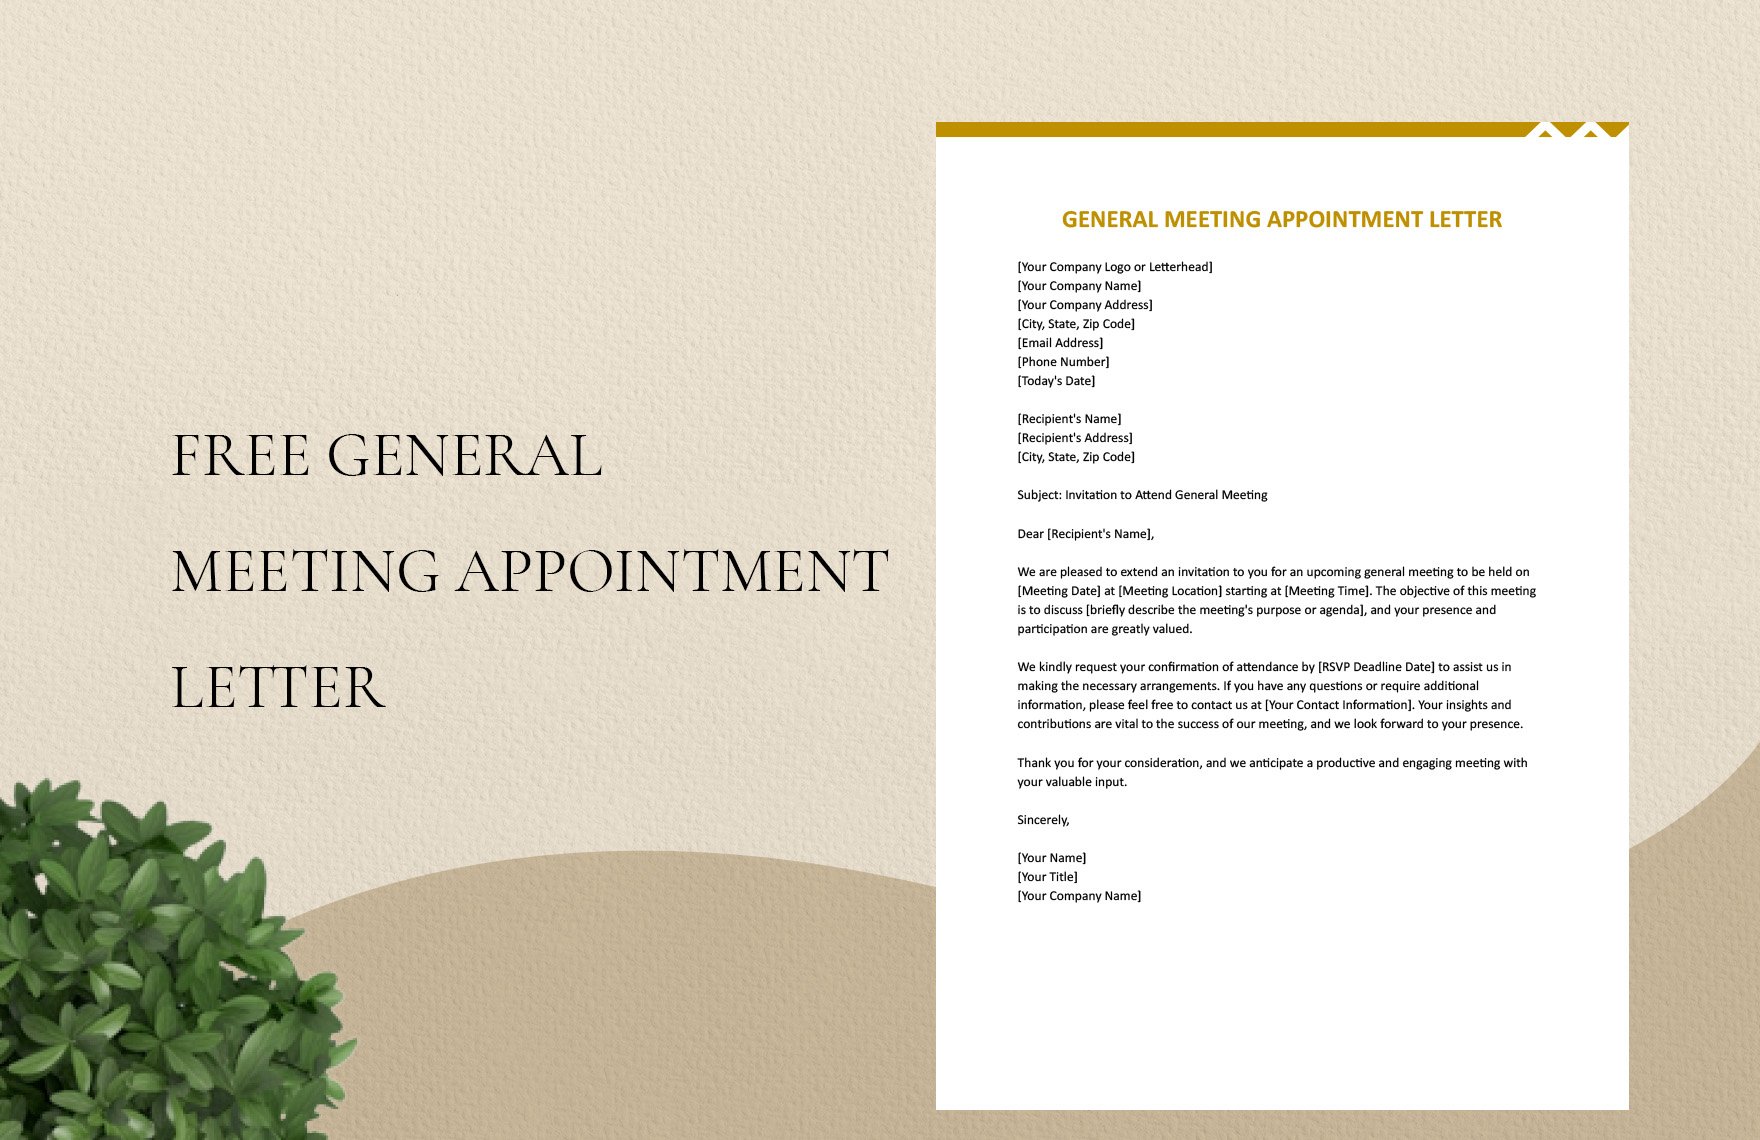 Free General Meeting Appointment Letter in Word, Google Docs